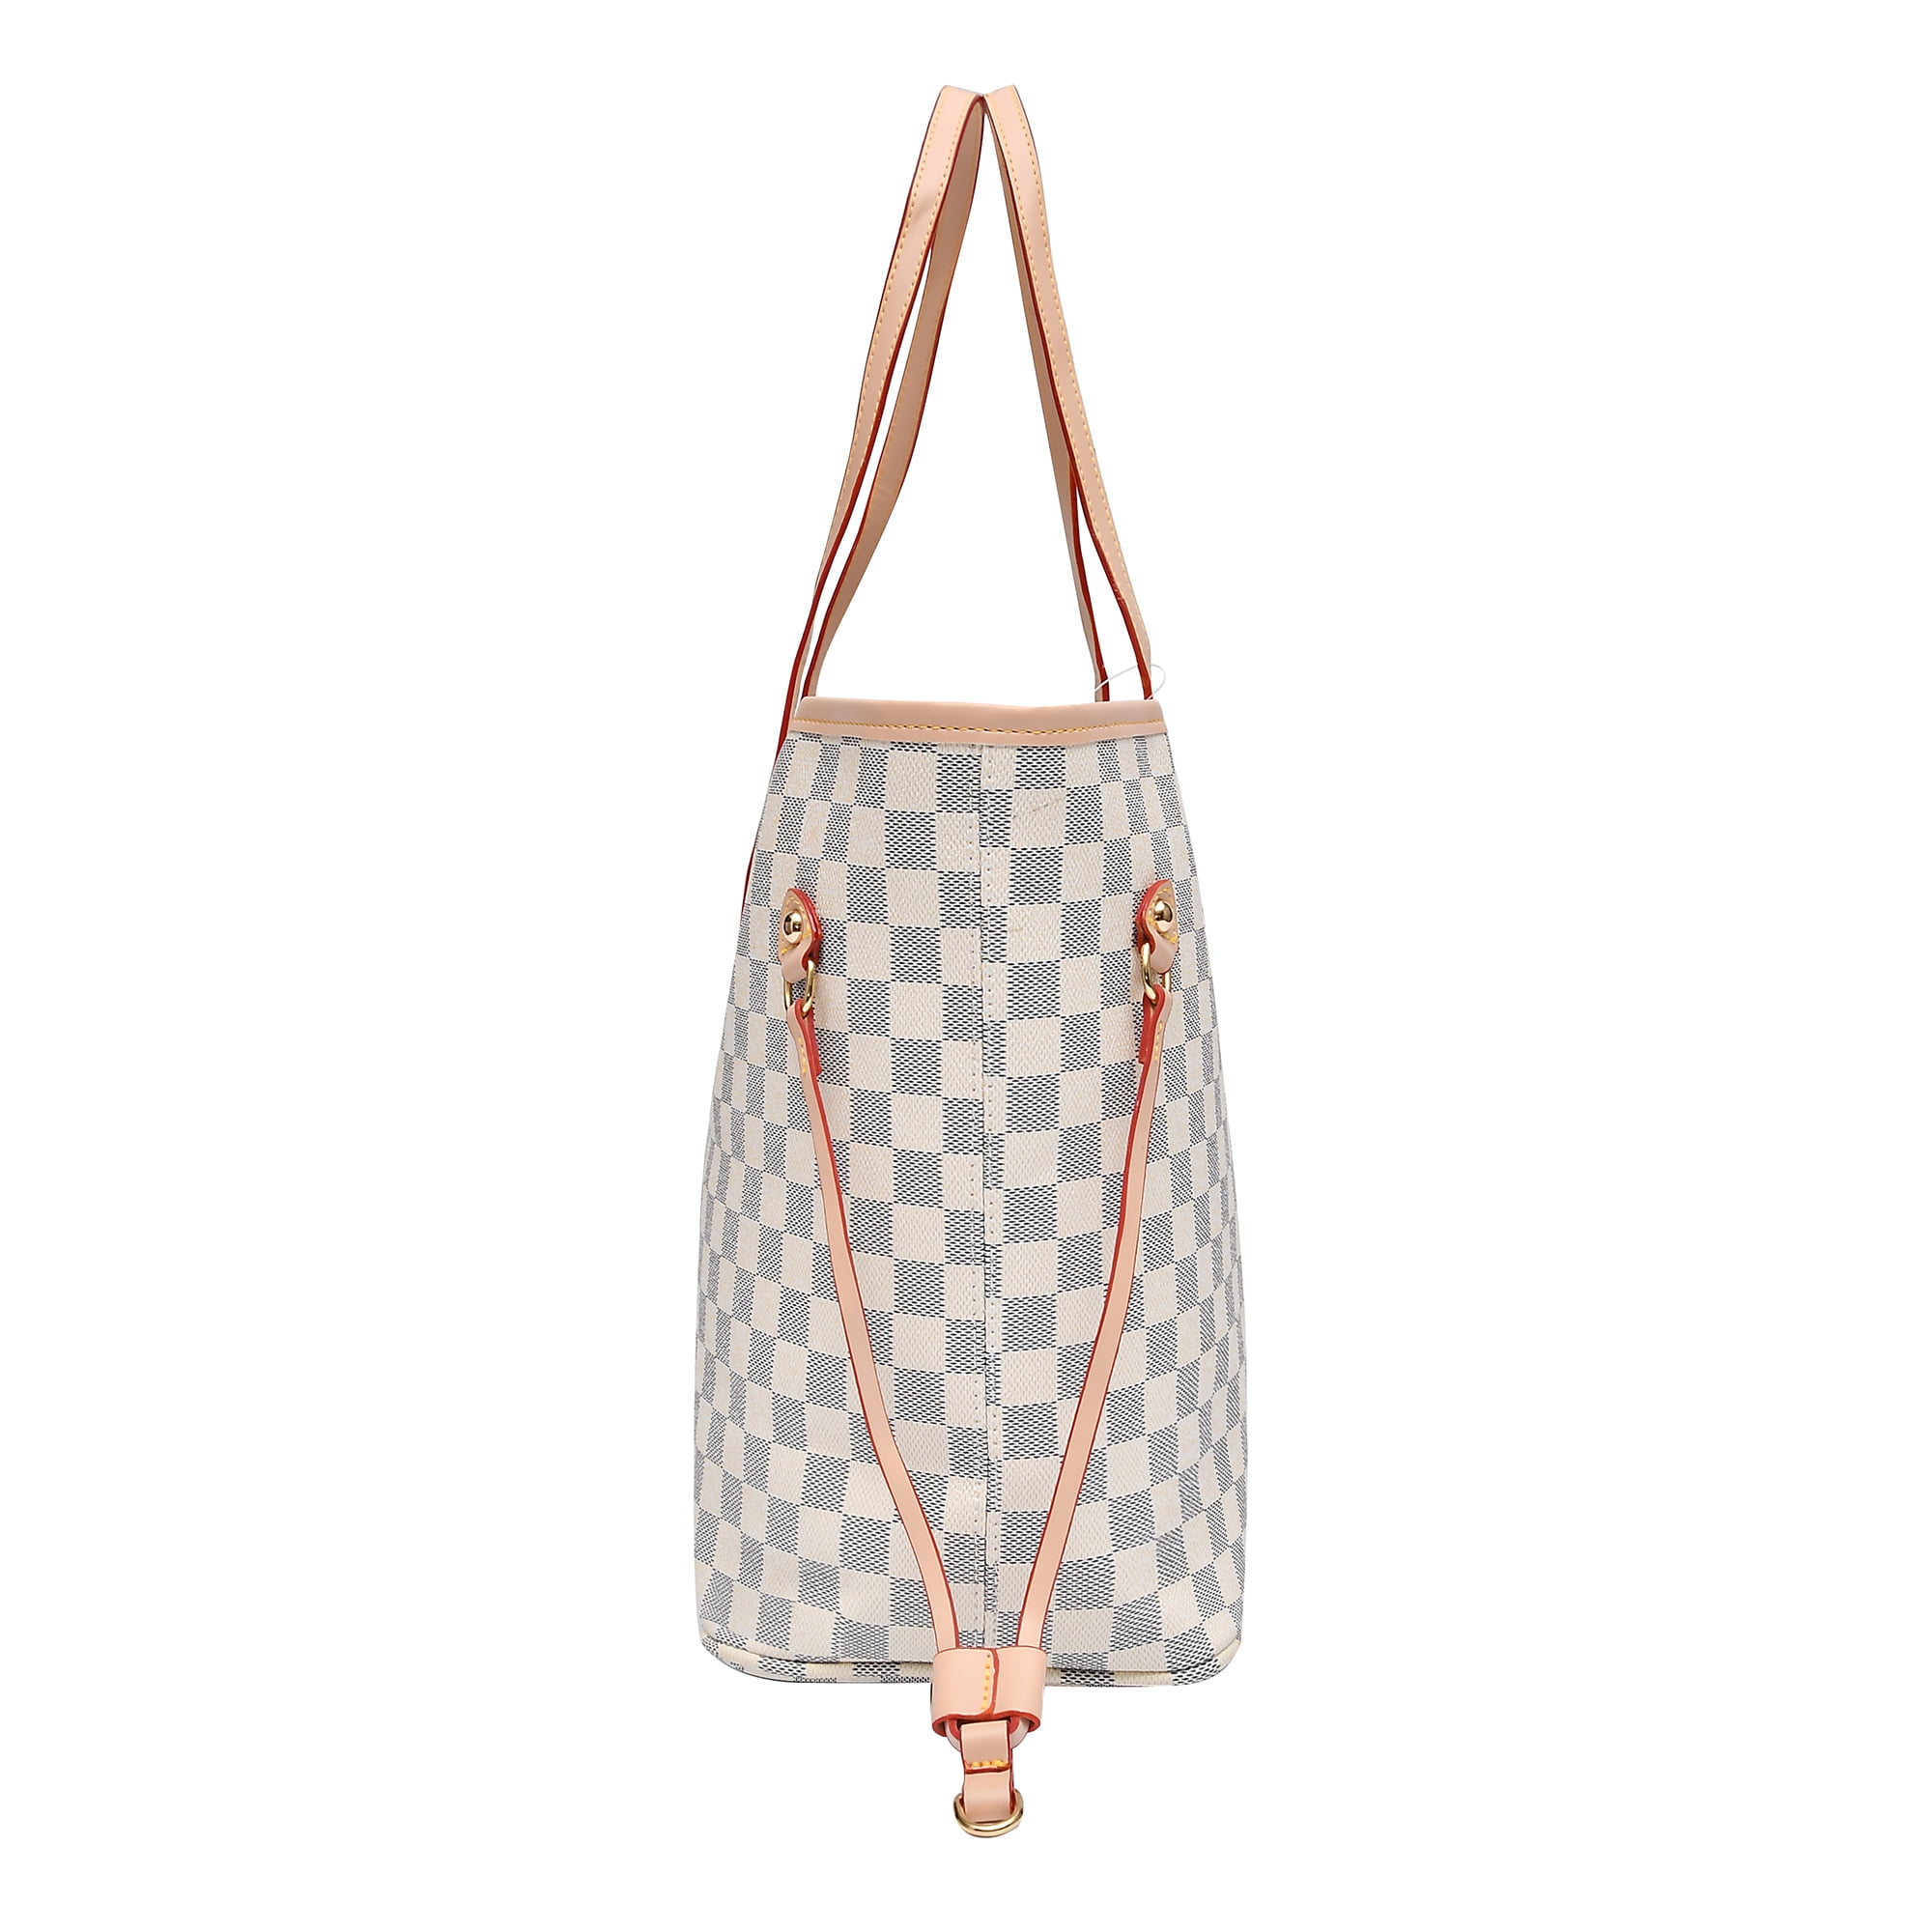  OTVEE Yellow Blue Checkered Plaid Shoulder Bags for